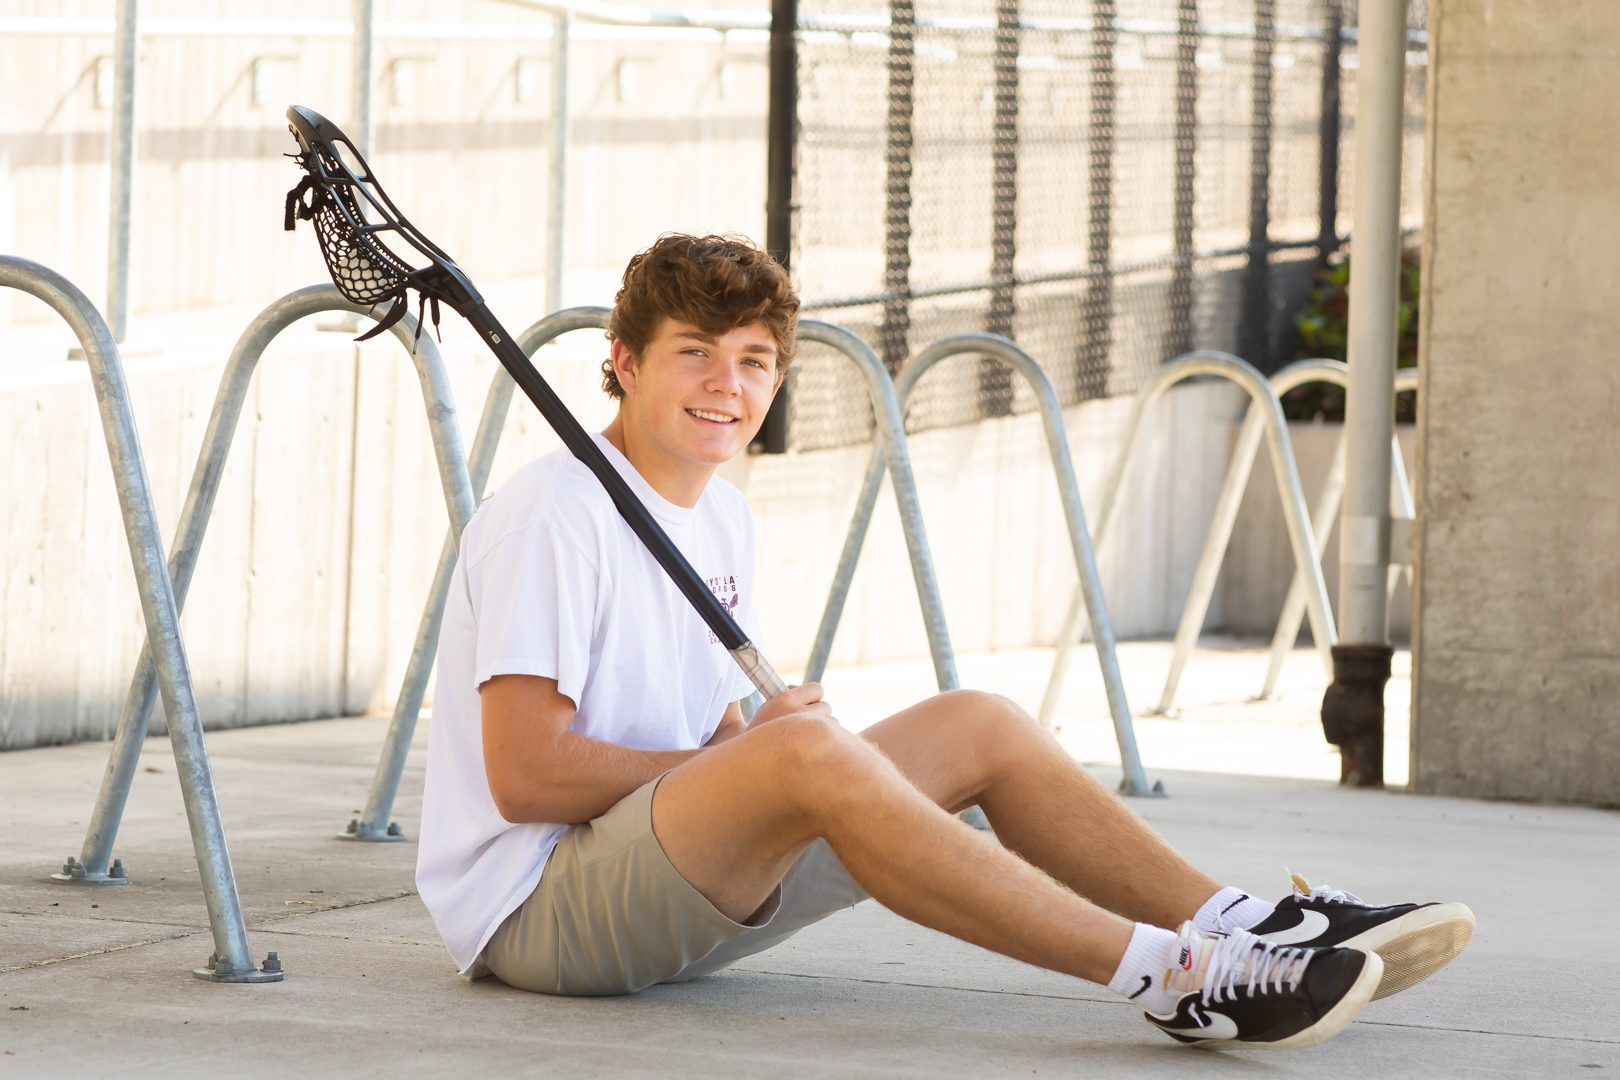 A young man sitting on the ground holding a lacrosse stick.